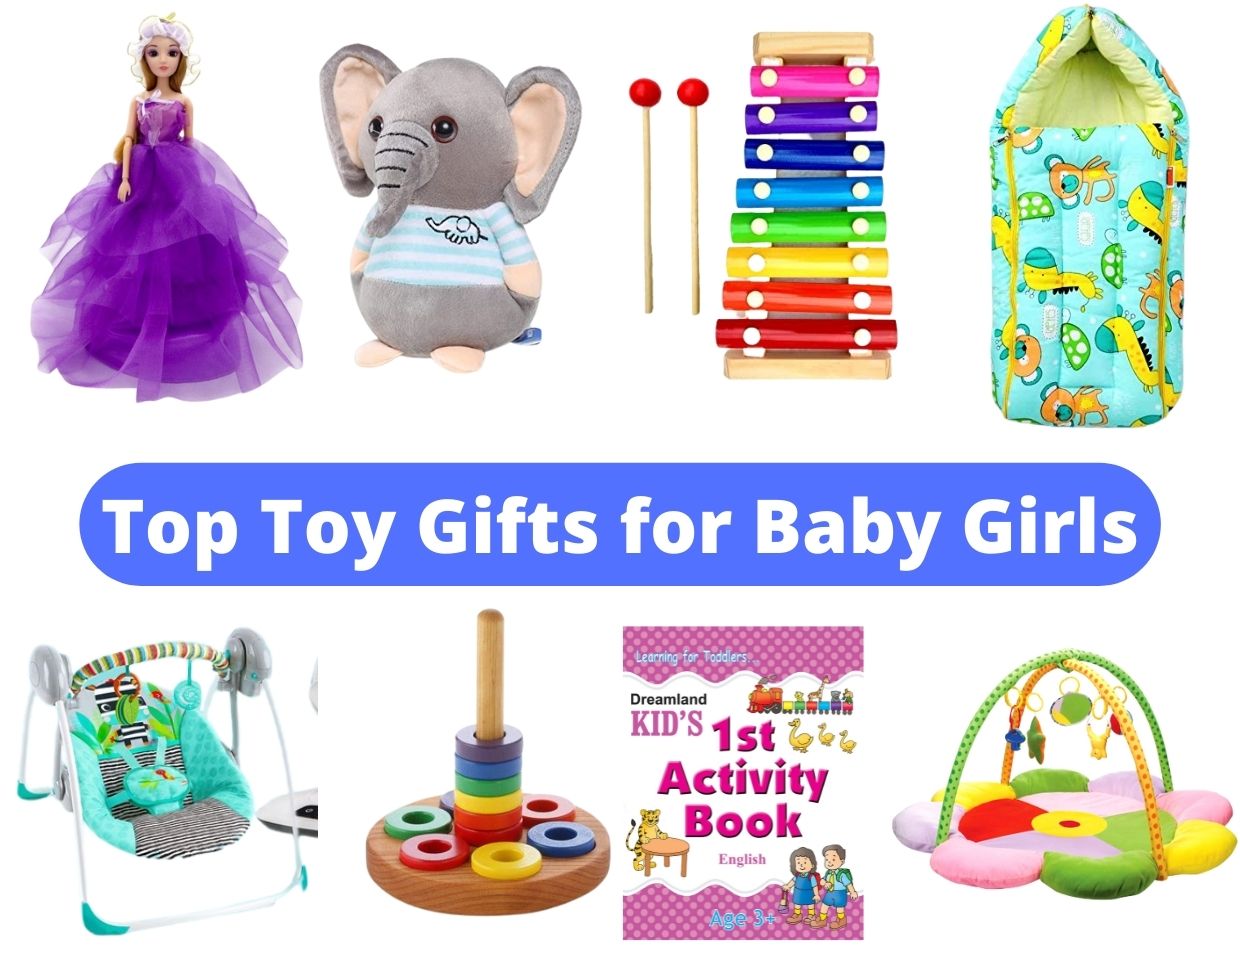 Top Toy Gifts for Baby Girls